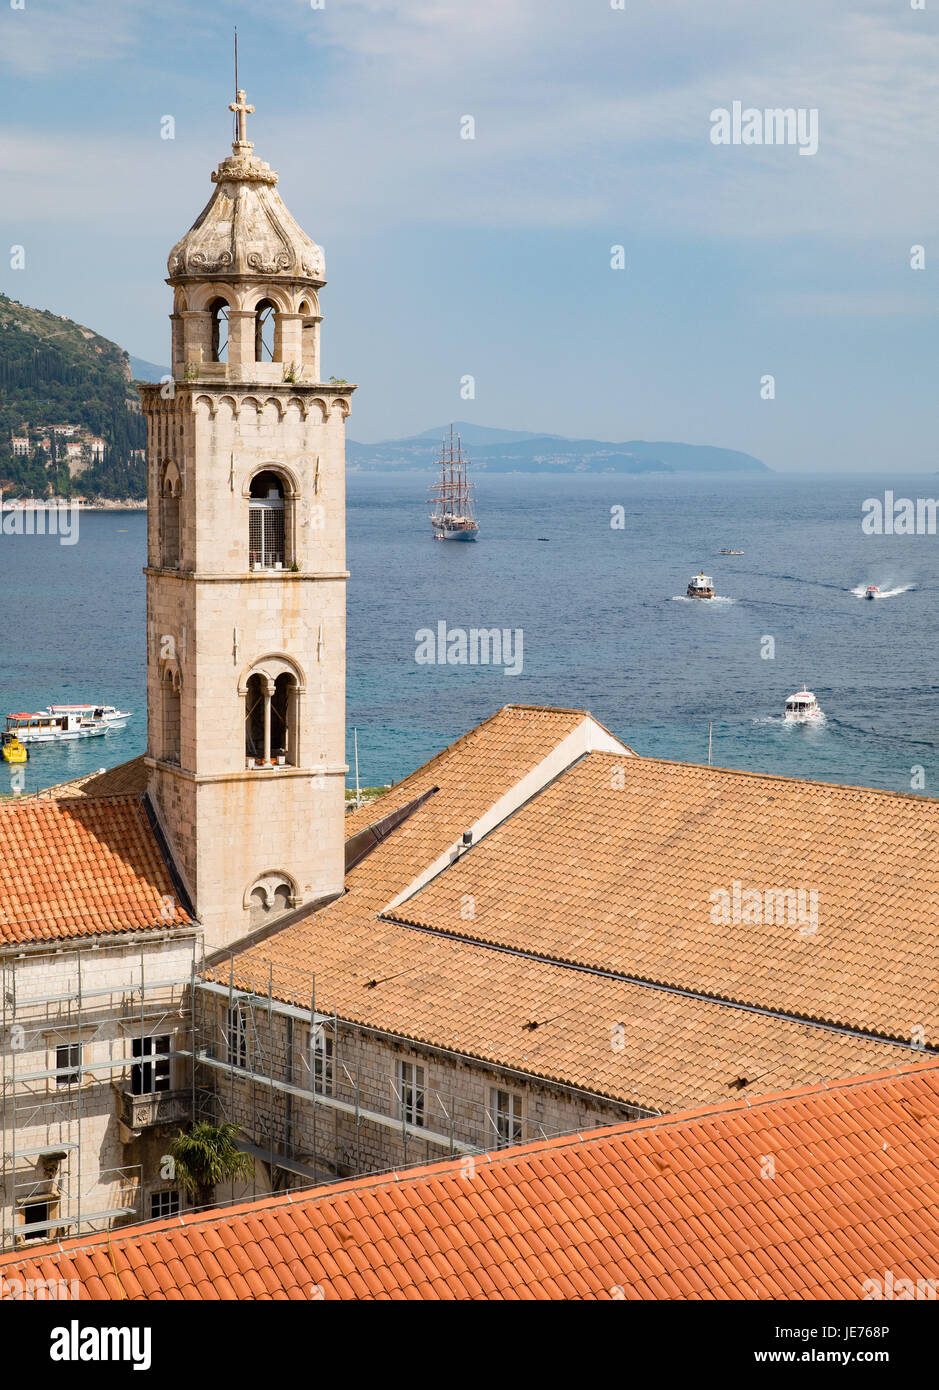 Bell tower of the Dominican monastery and museum overlooking the medieval city of Dubrovnik in Croatia Stock Photo